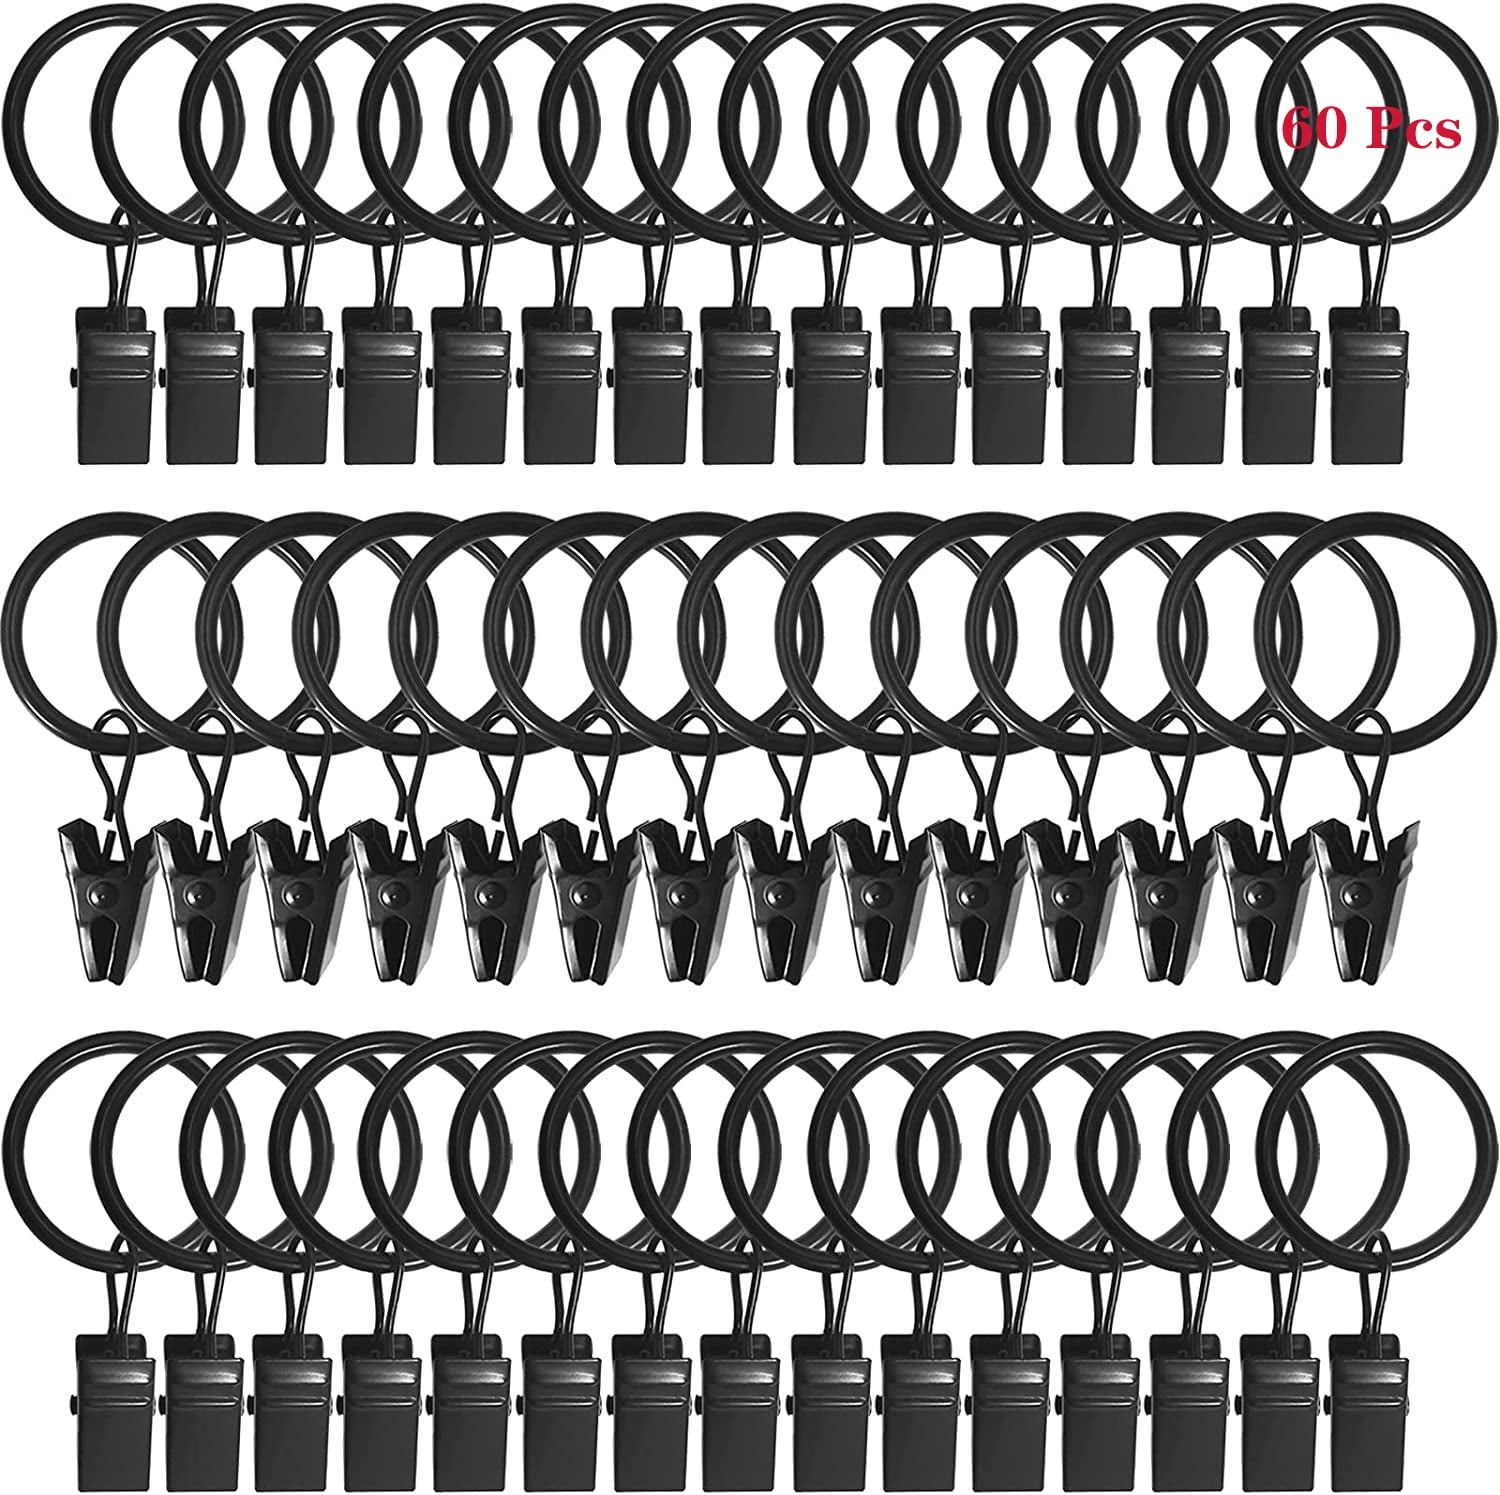 42 Pack Curtain Rings with Clips Decorative Drapery Rustproof Vintage Compatible with up to 5/8 inch Rod Black 